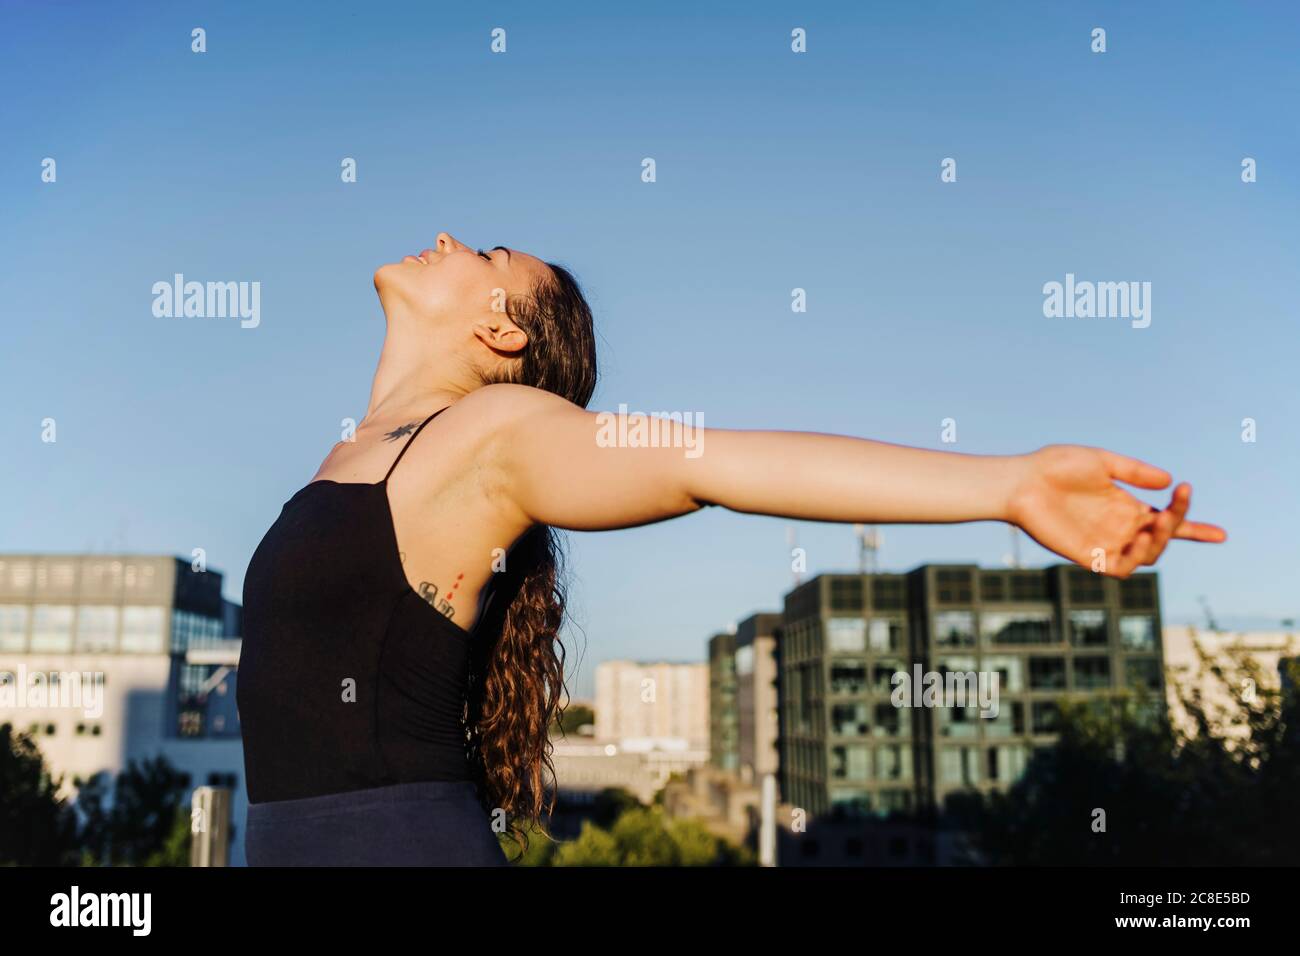 Carefree sporty woman standing with arms outstretched in city against clear blue sky Stock Photo